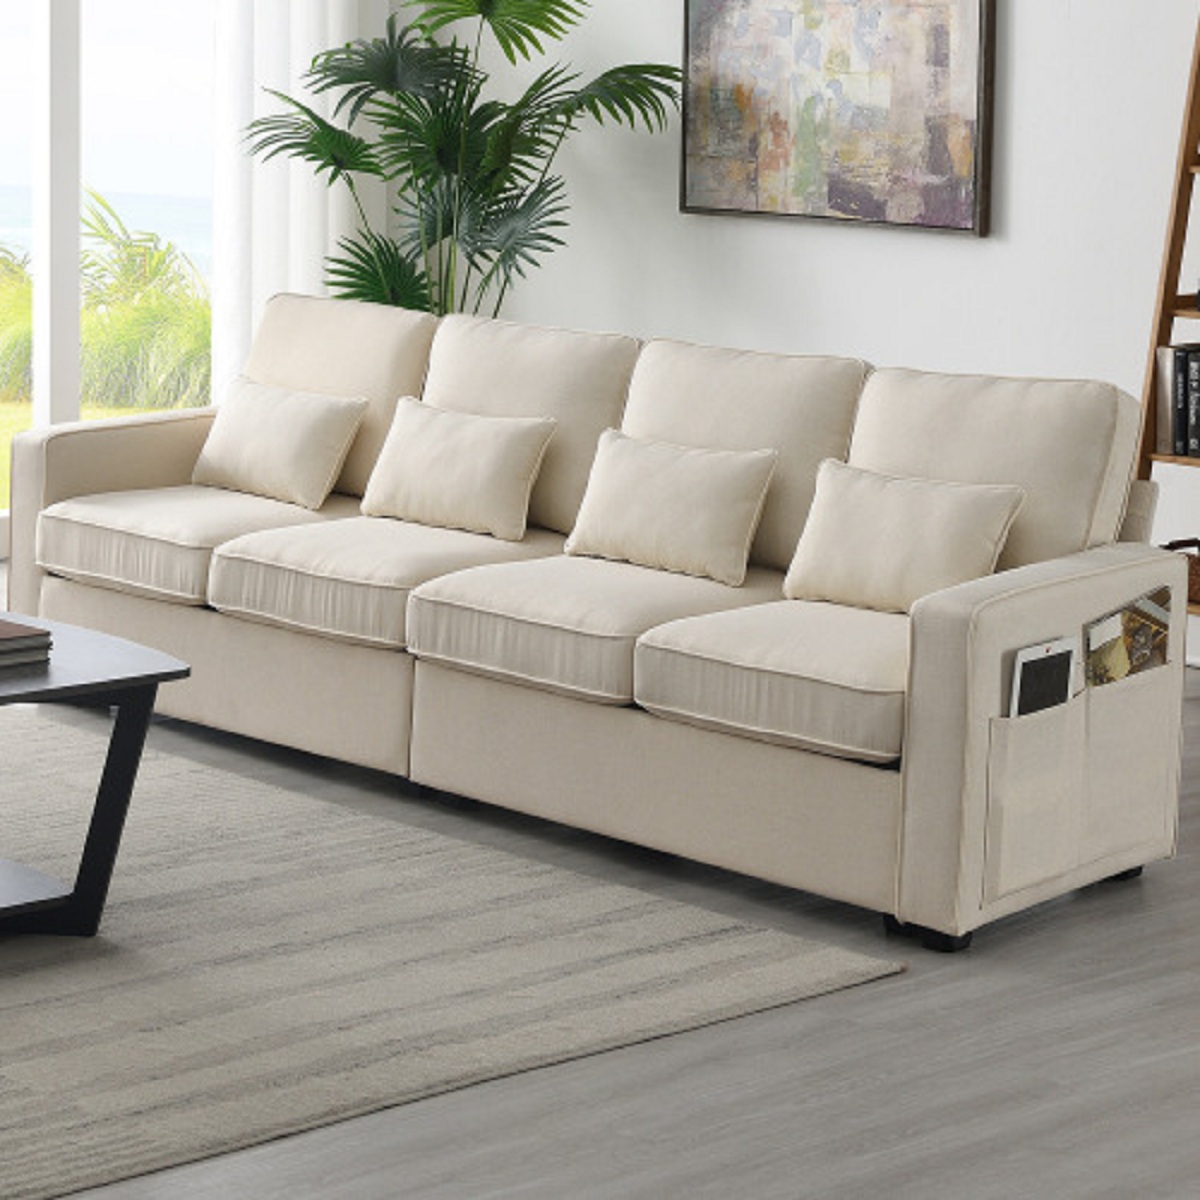 Hollywood Decor Sciacca 4-Seater  Minimalist Style Couch with Armrest Pockets and 4 Pillows in Beige Linen